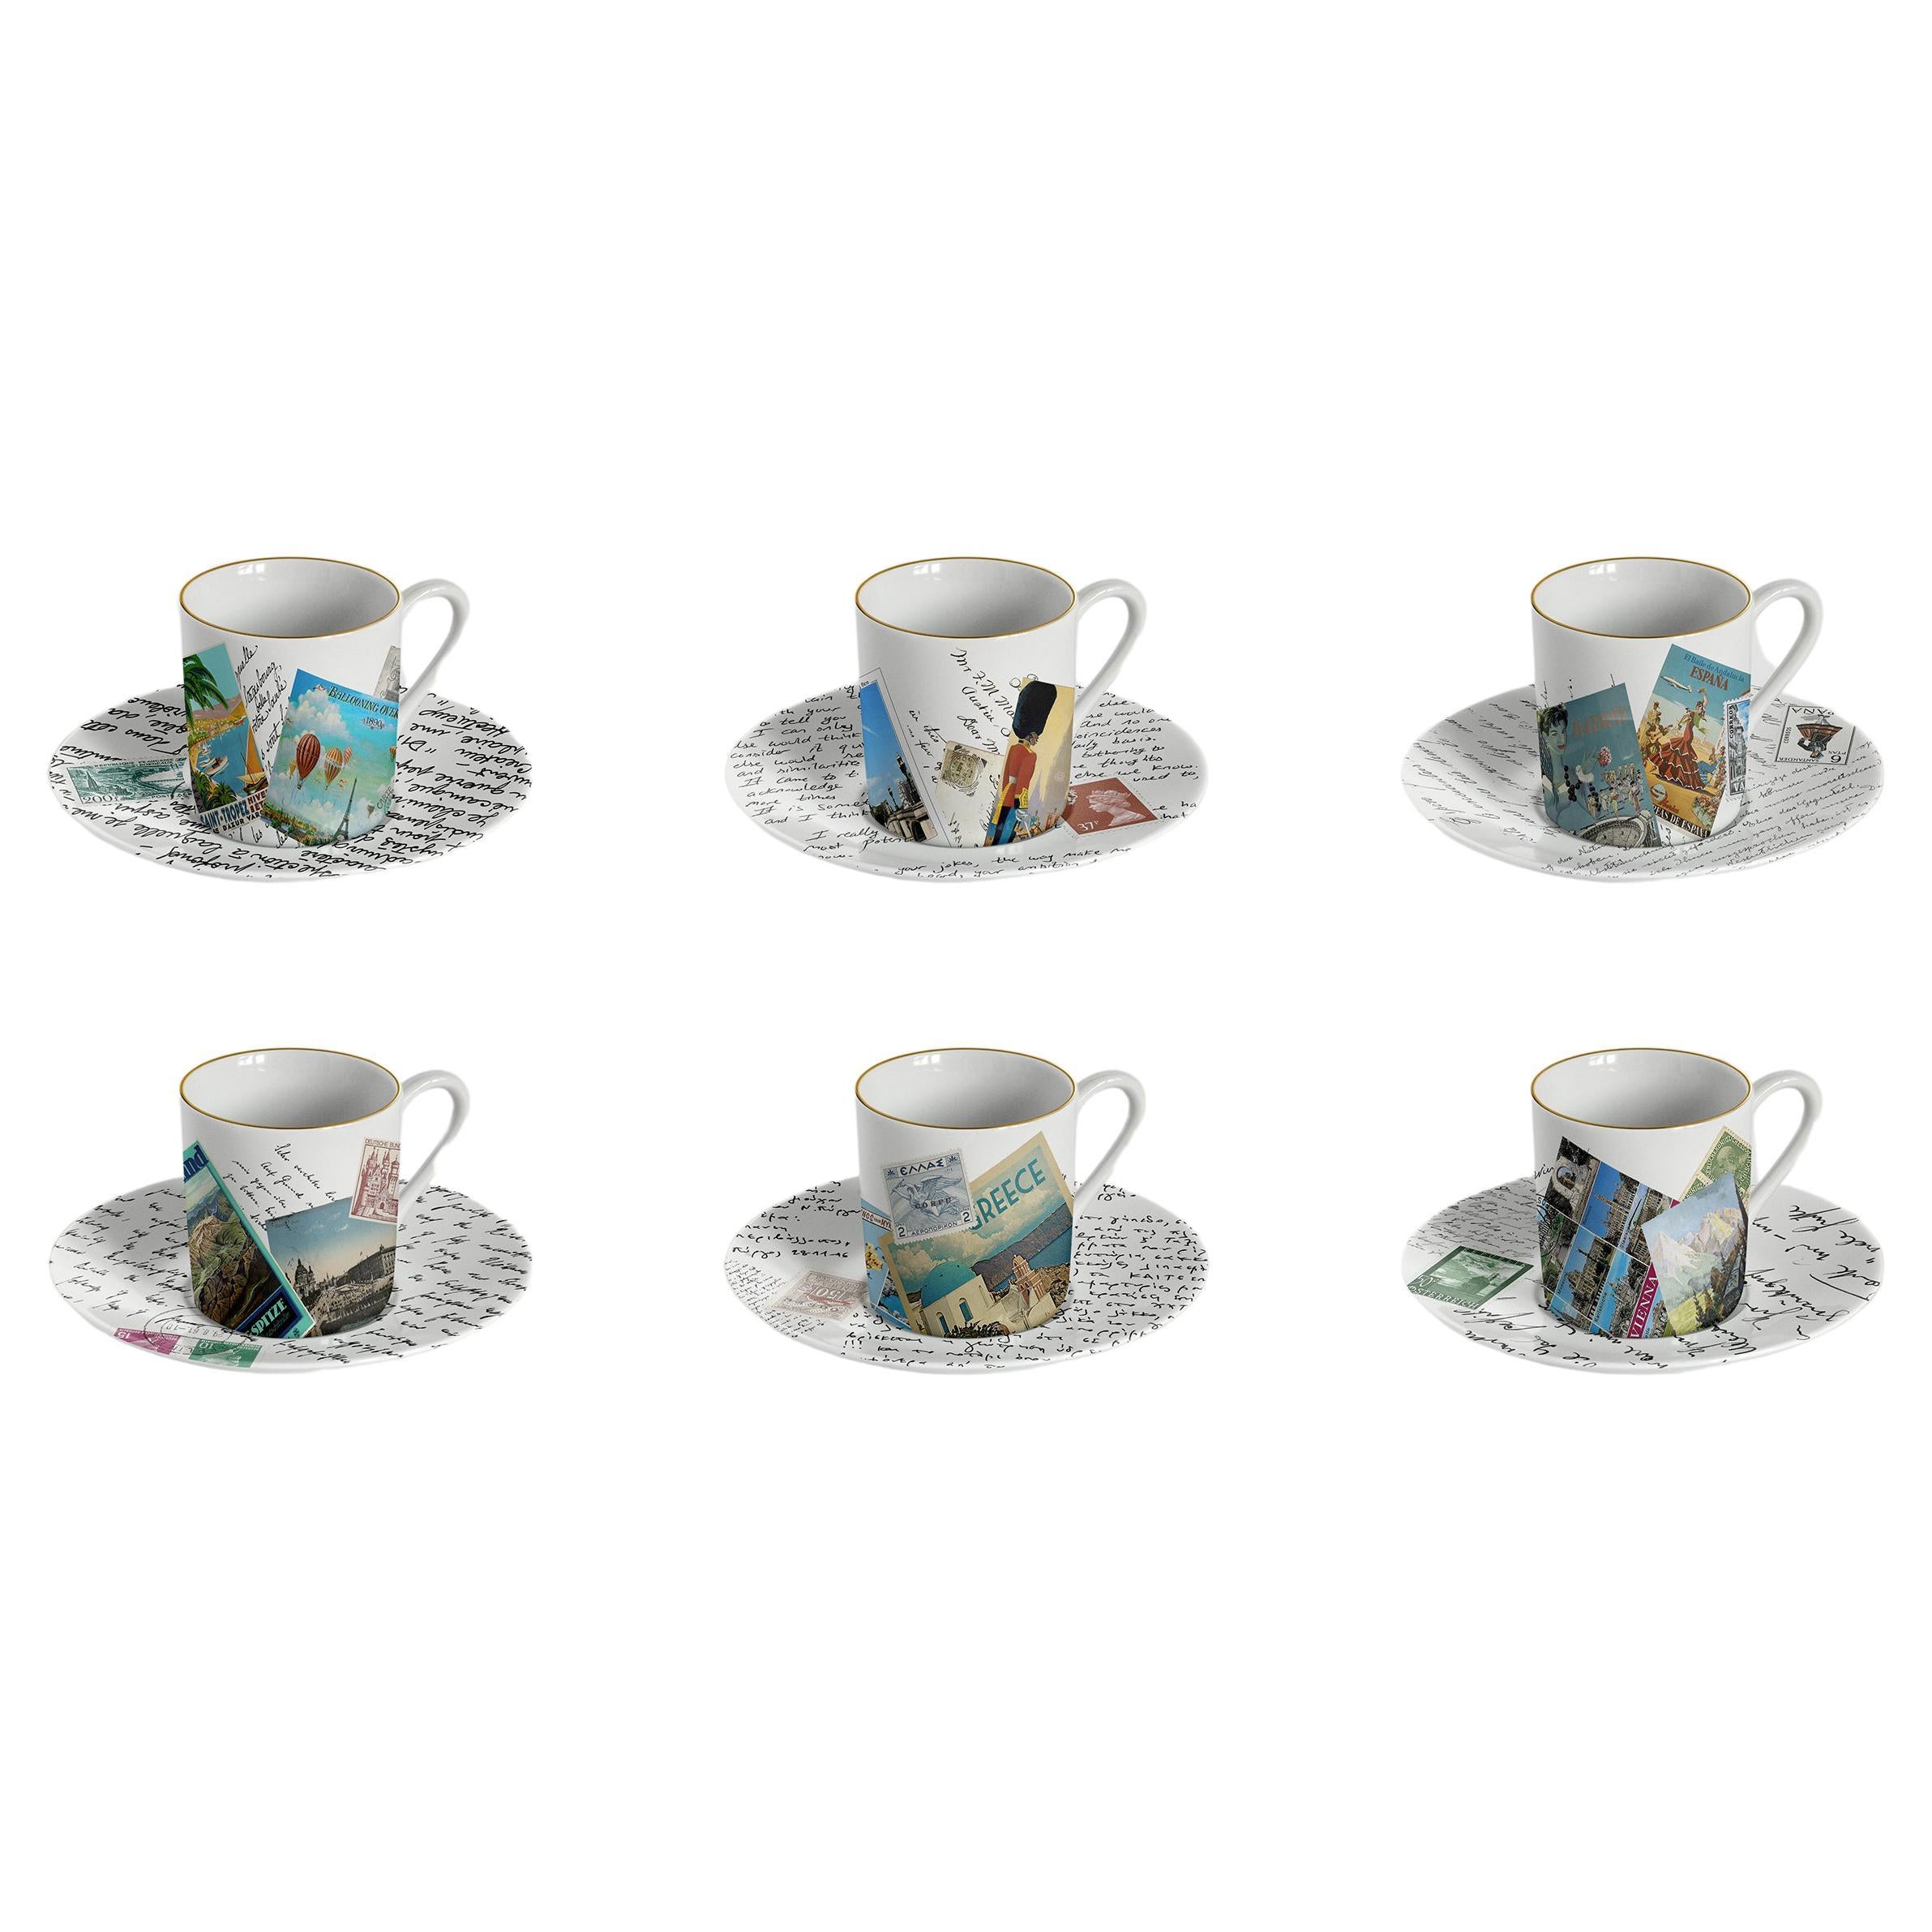 Corrispondenze, Six Contemporary Decorated Coffee Cups with Plates